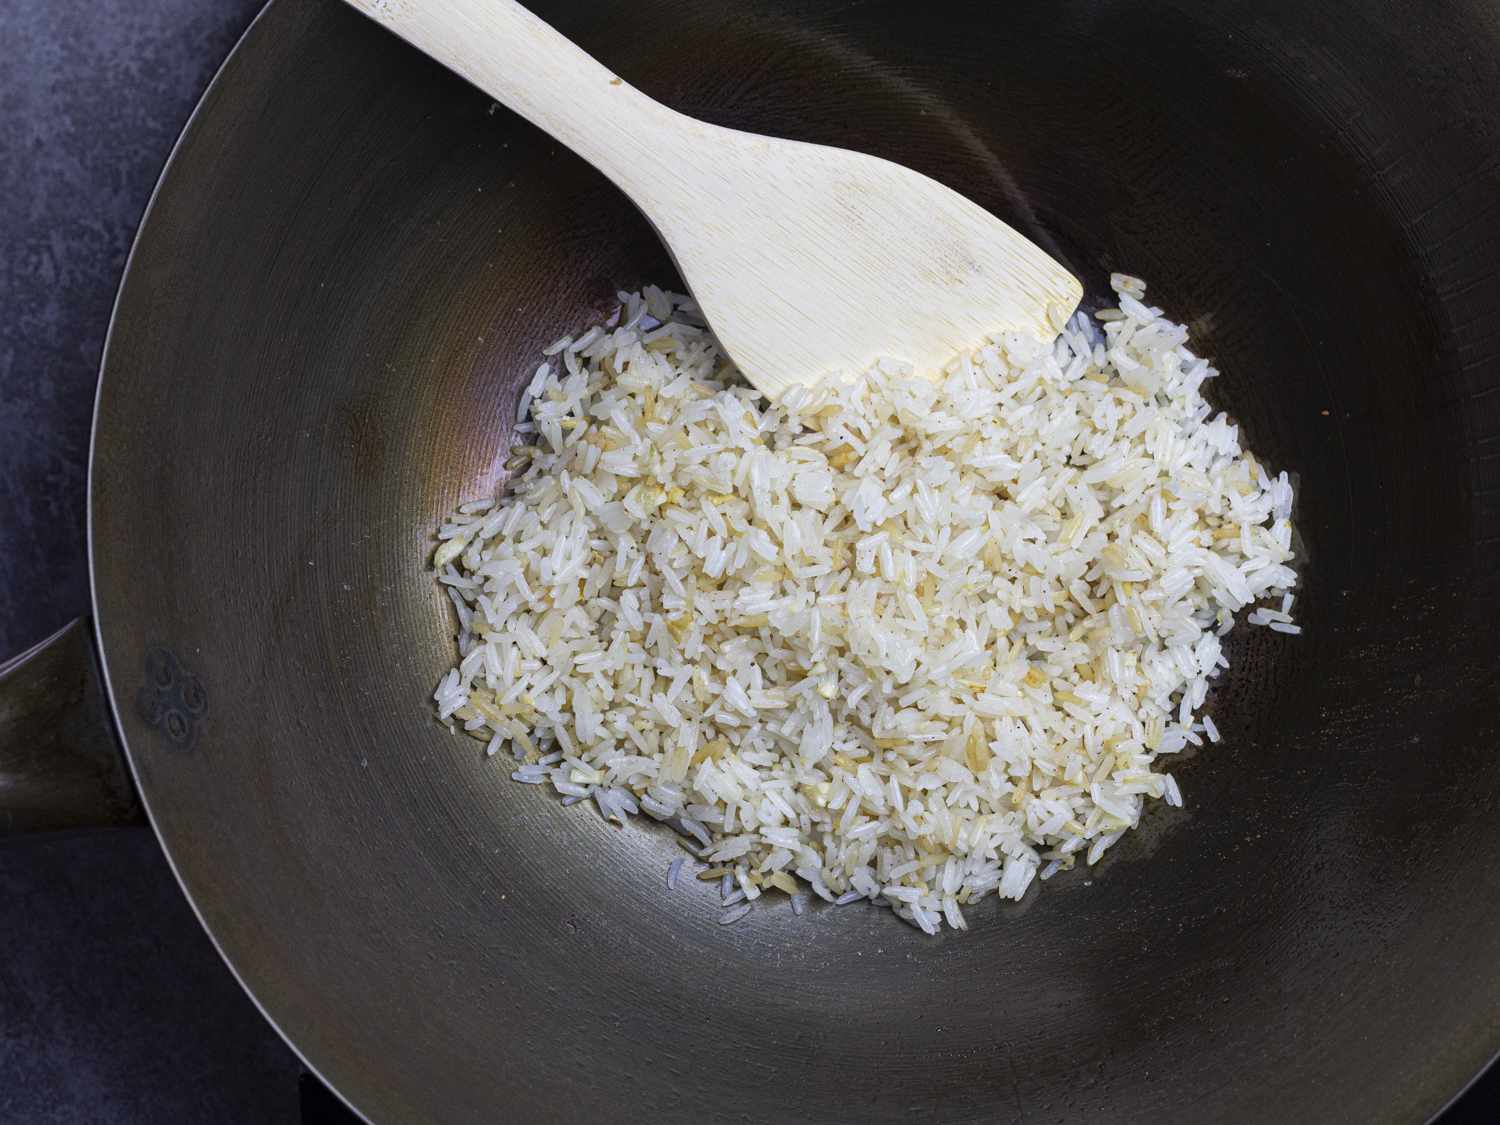 Garlic fried rice being cooked in a wok